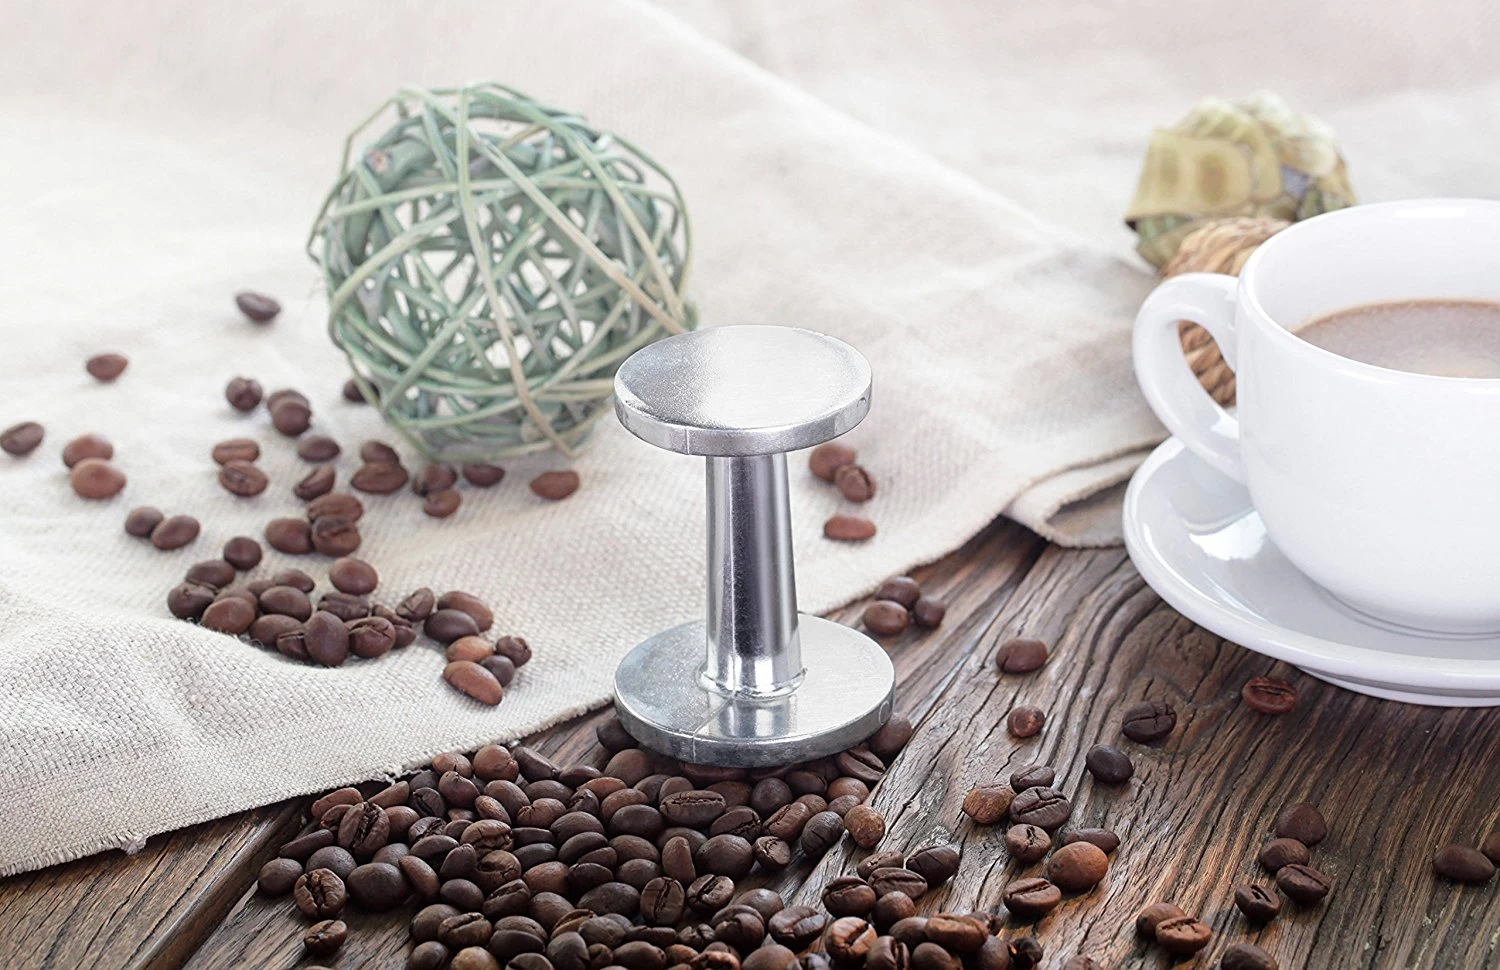 china Stainless Steel coffee bean press factory coffee bean press wholesalers china Stainless Steel coffee bean press suppliers china